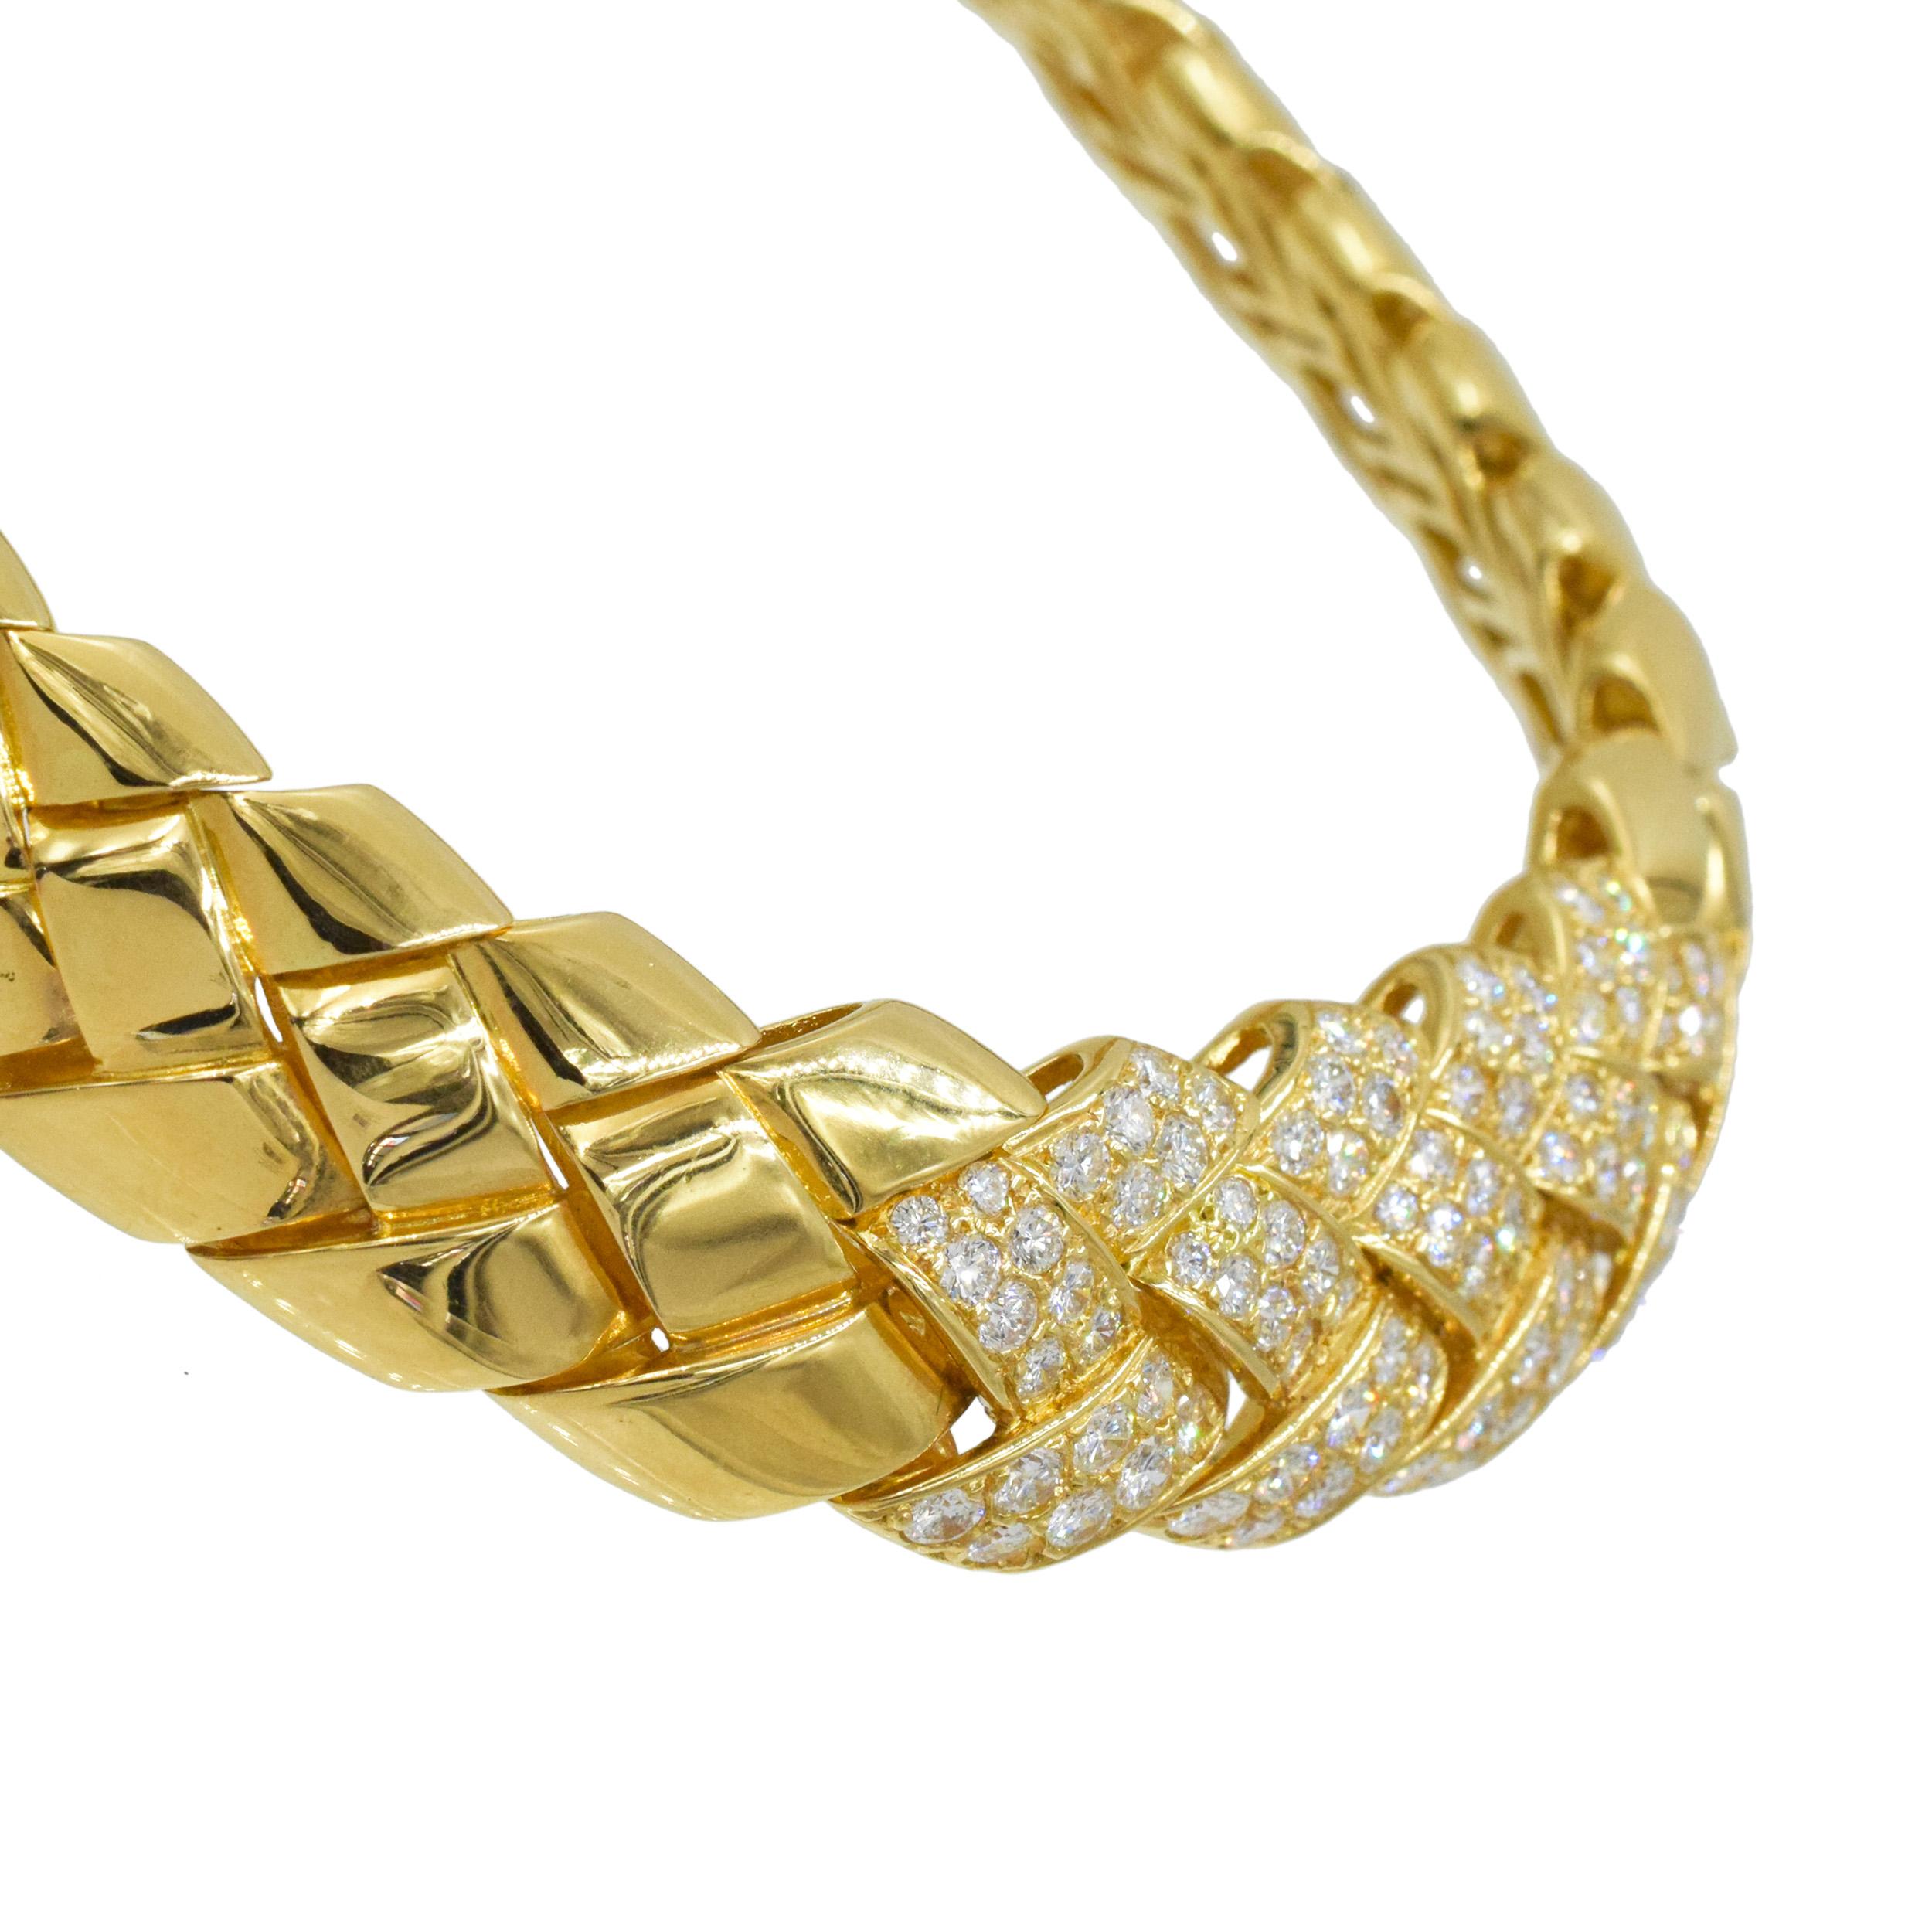 Van Cleef & Arpels Diamond and Yellow Gold Necklace This necklace has a woven motif with 96 round diamonds weighing approximately 6 carats all set in 18k  yellow gold. Signed Van Cleef & Arpels,
 750, Serial Number xxxx
Made in France signed and